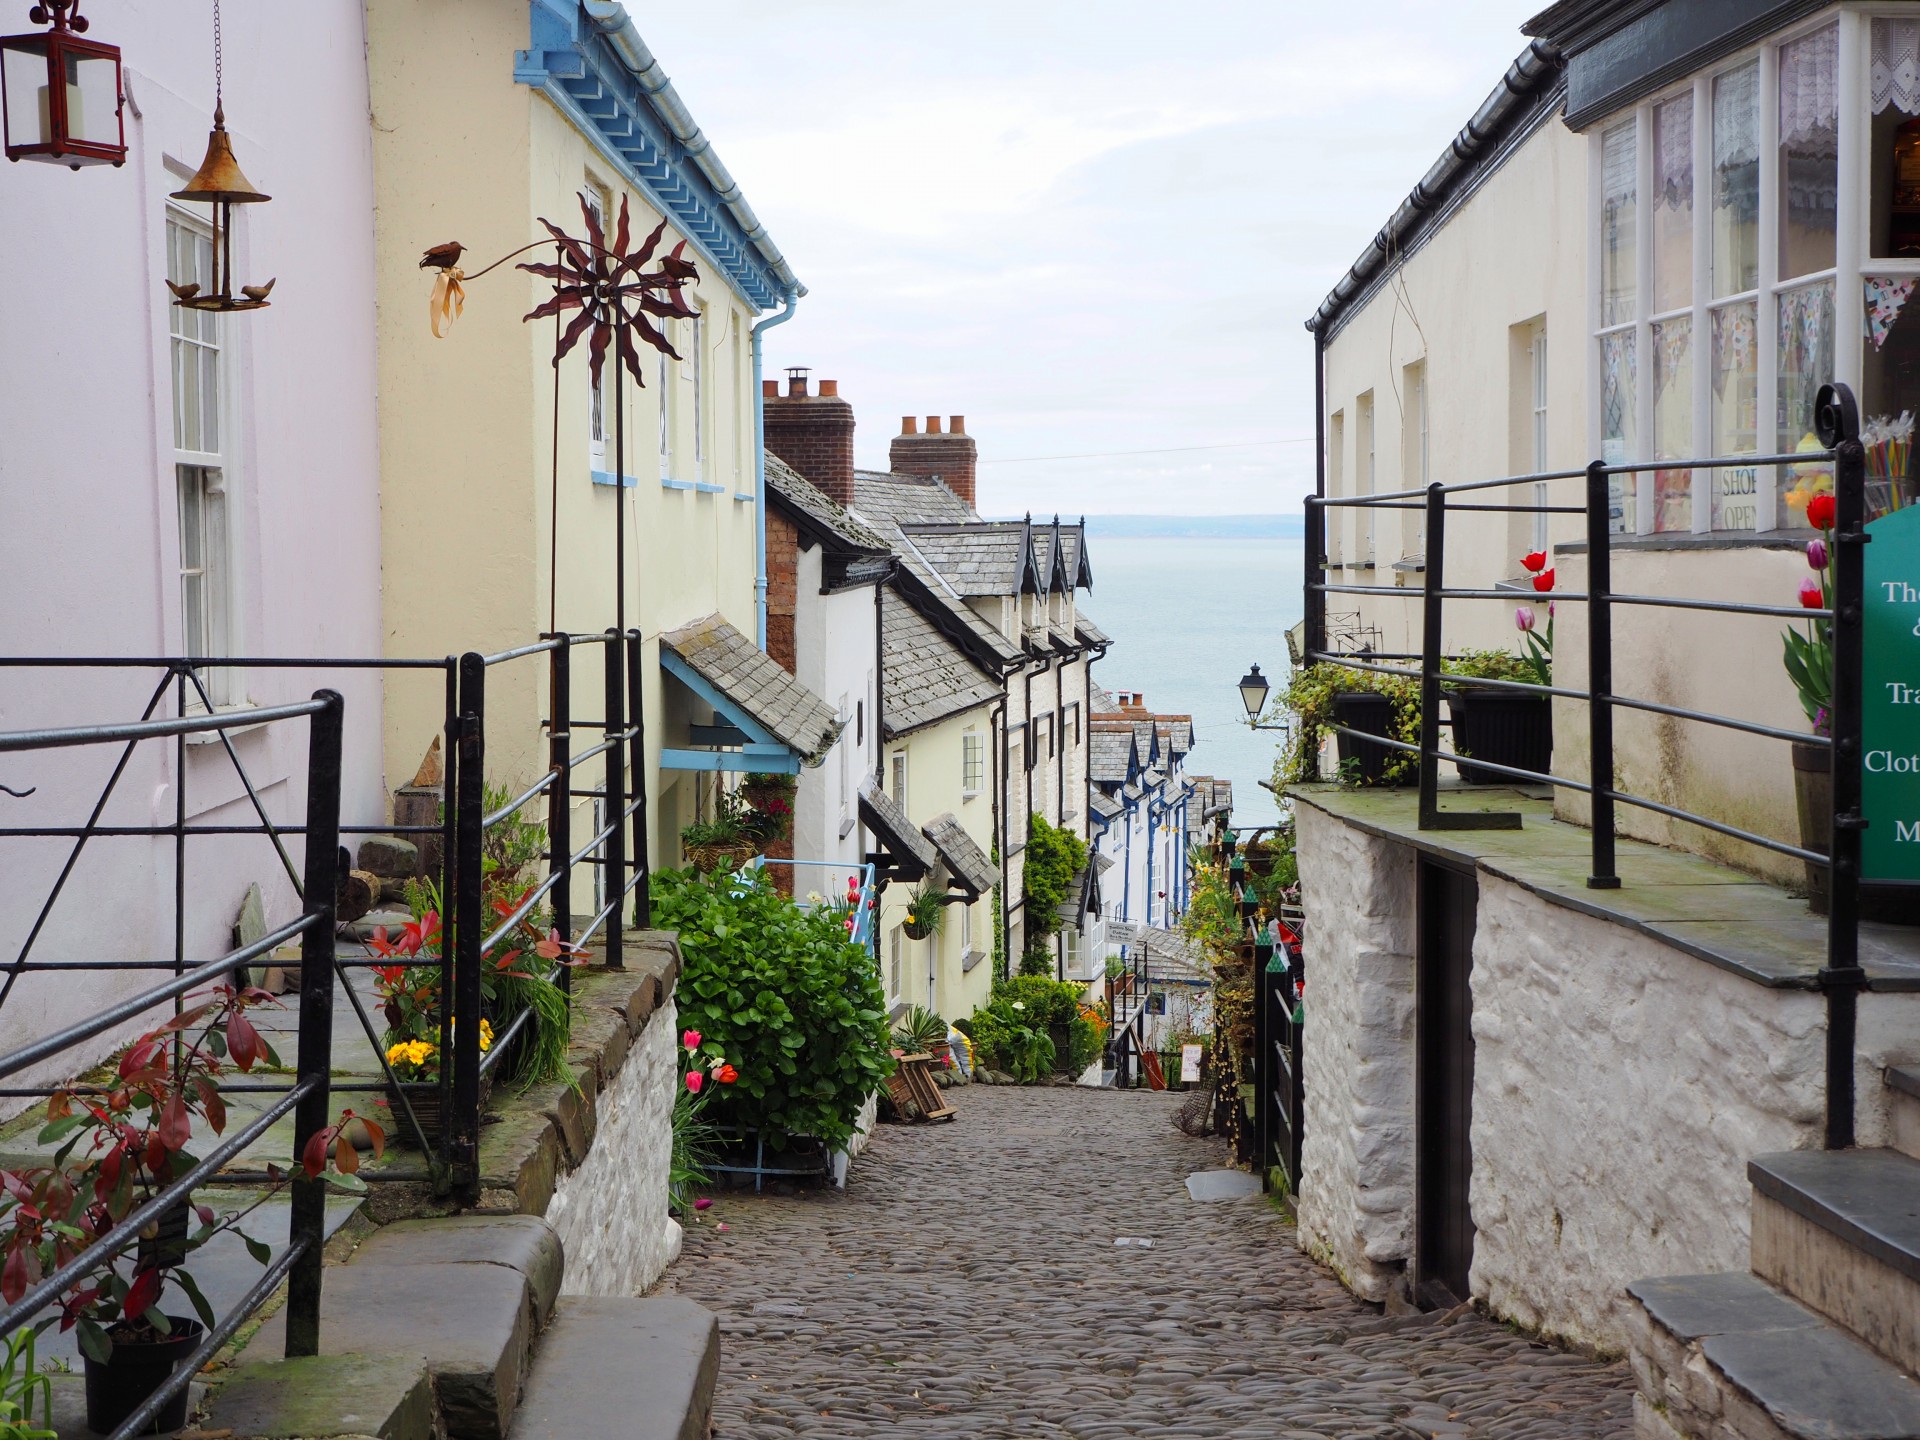 It's a steep path down to the bottom of Clovelly.